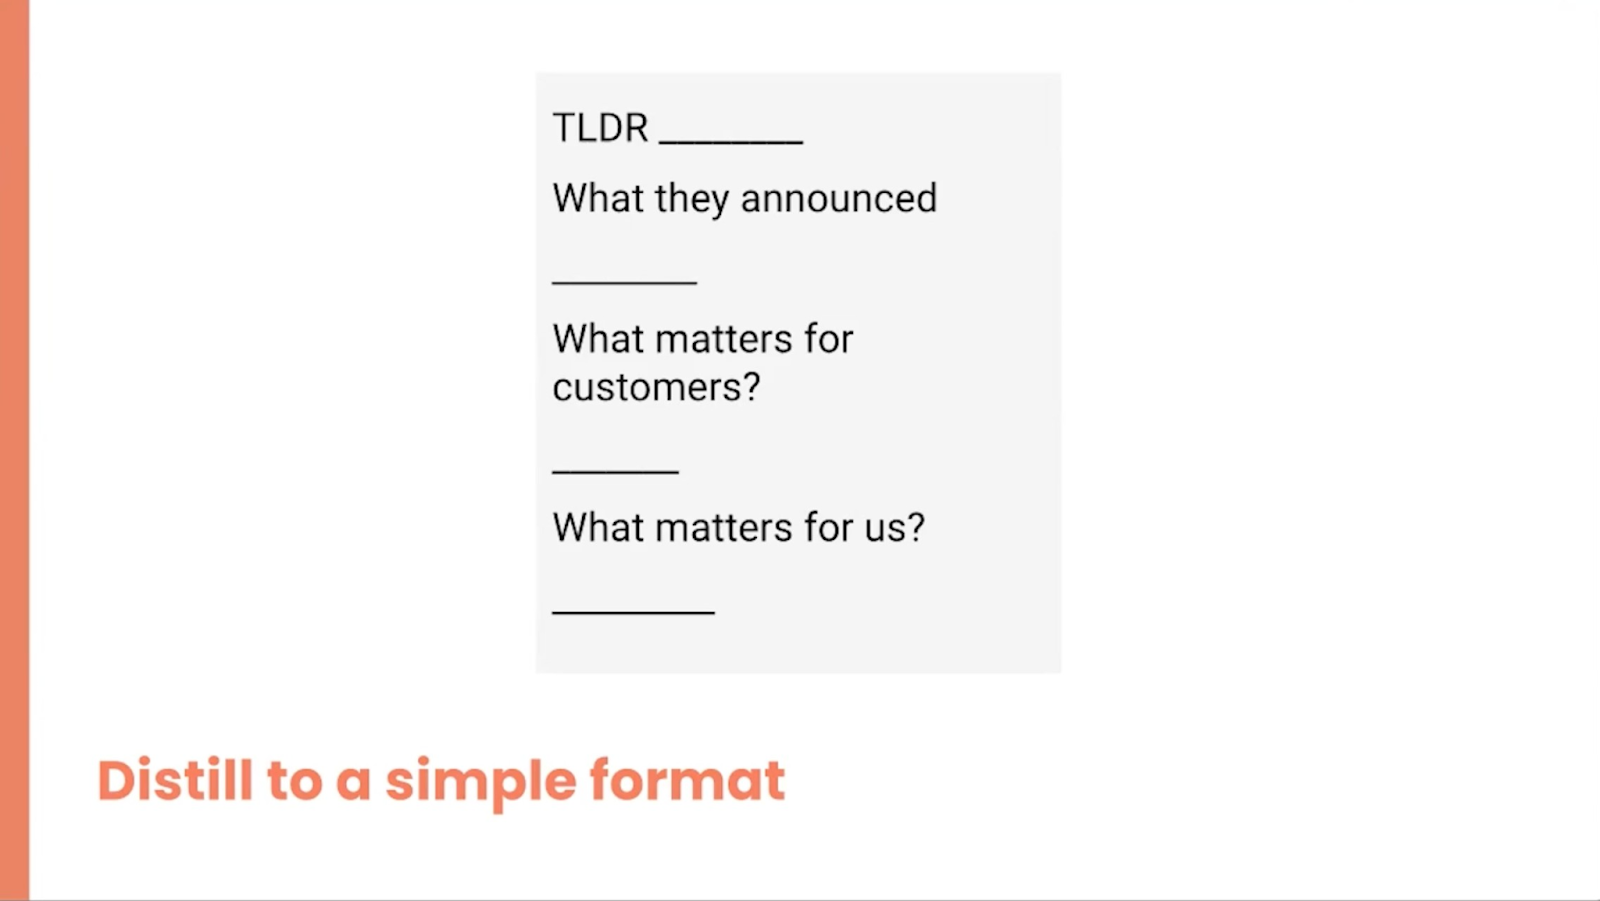 A title that says "Distill to a simple format" and then writing then says "TLDR", "What they announced", "What matters for customers?" and "What matters for us?"